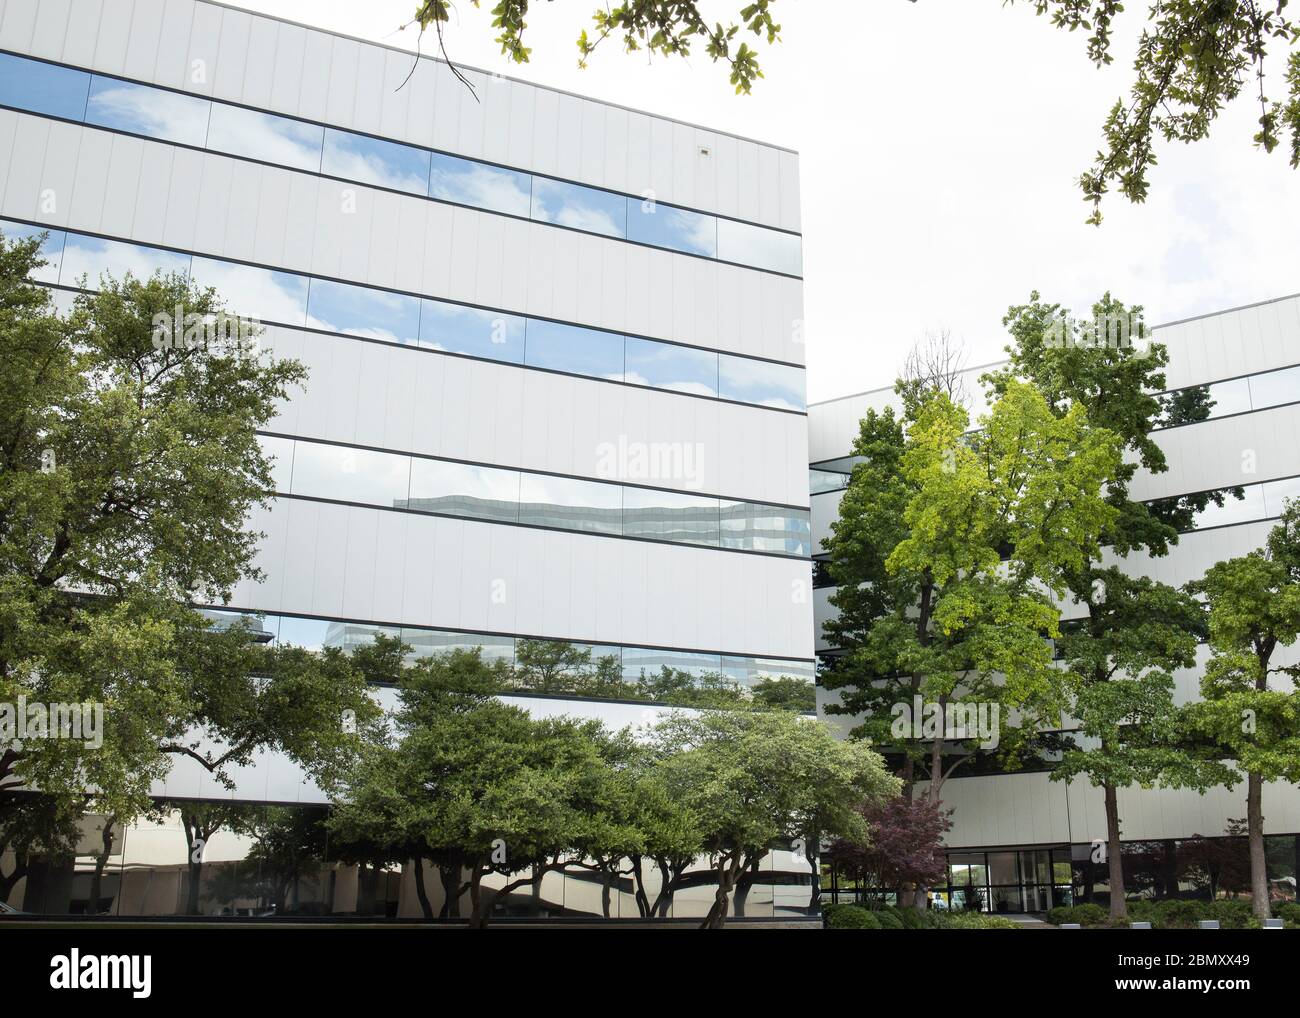 Tall modern Dallas, Texas office tower illustrates a contemporary modern workplace surrounded by trees Stock Photo